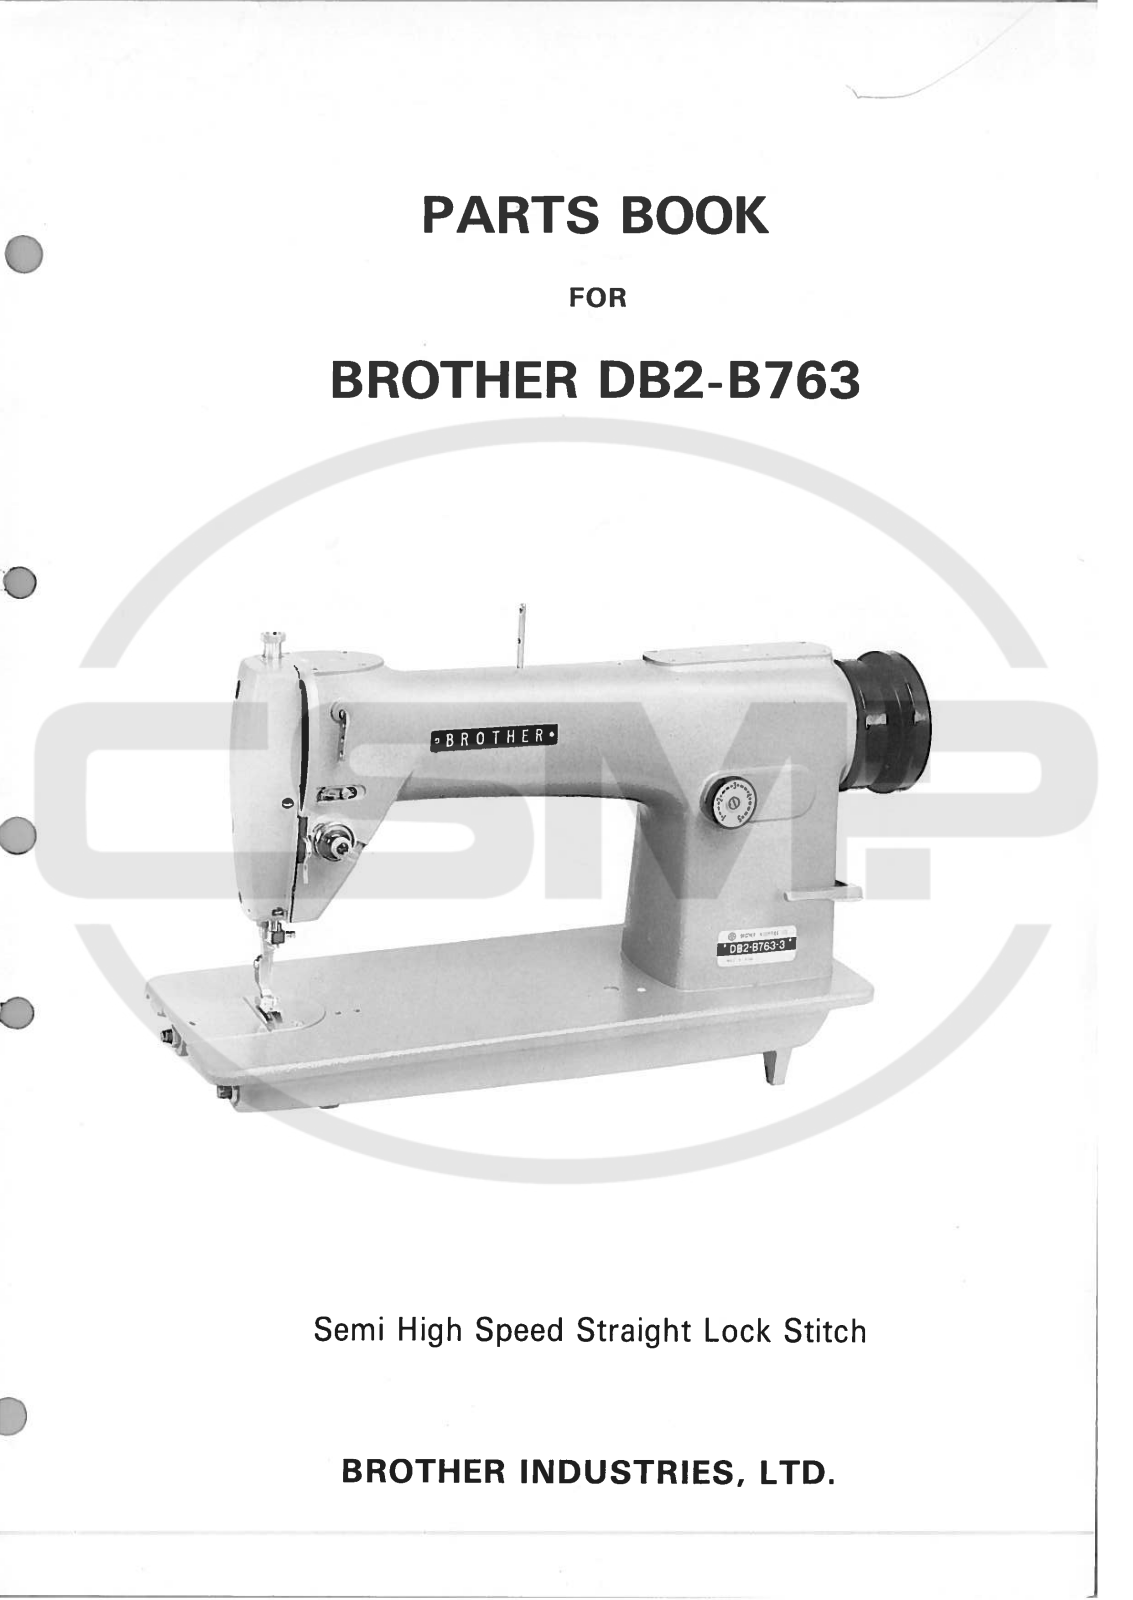 Brother DB2 B763 Parts Book